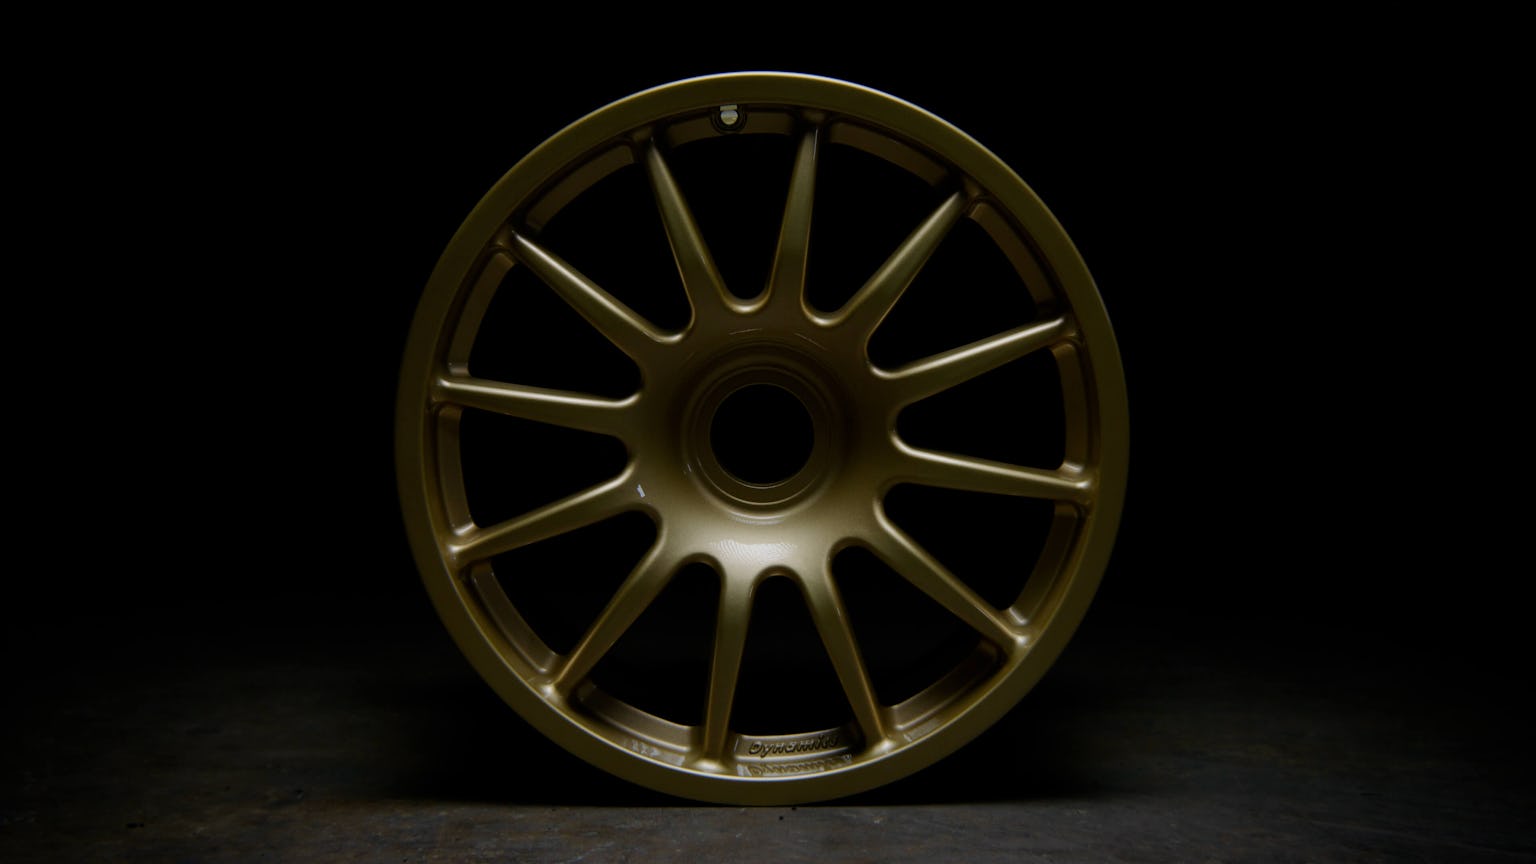 Refurnished alloy wheel in gold